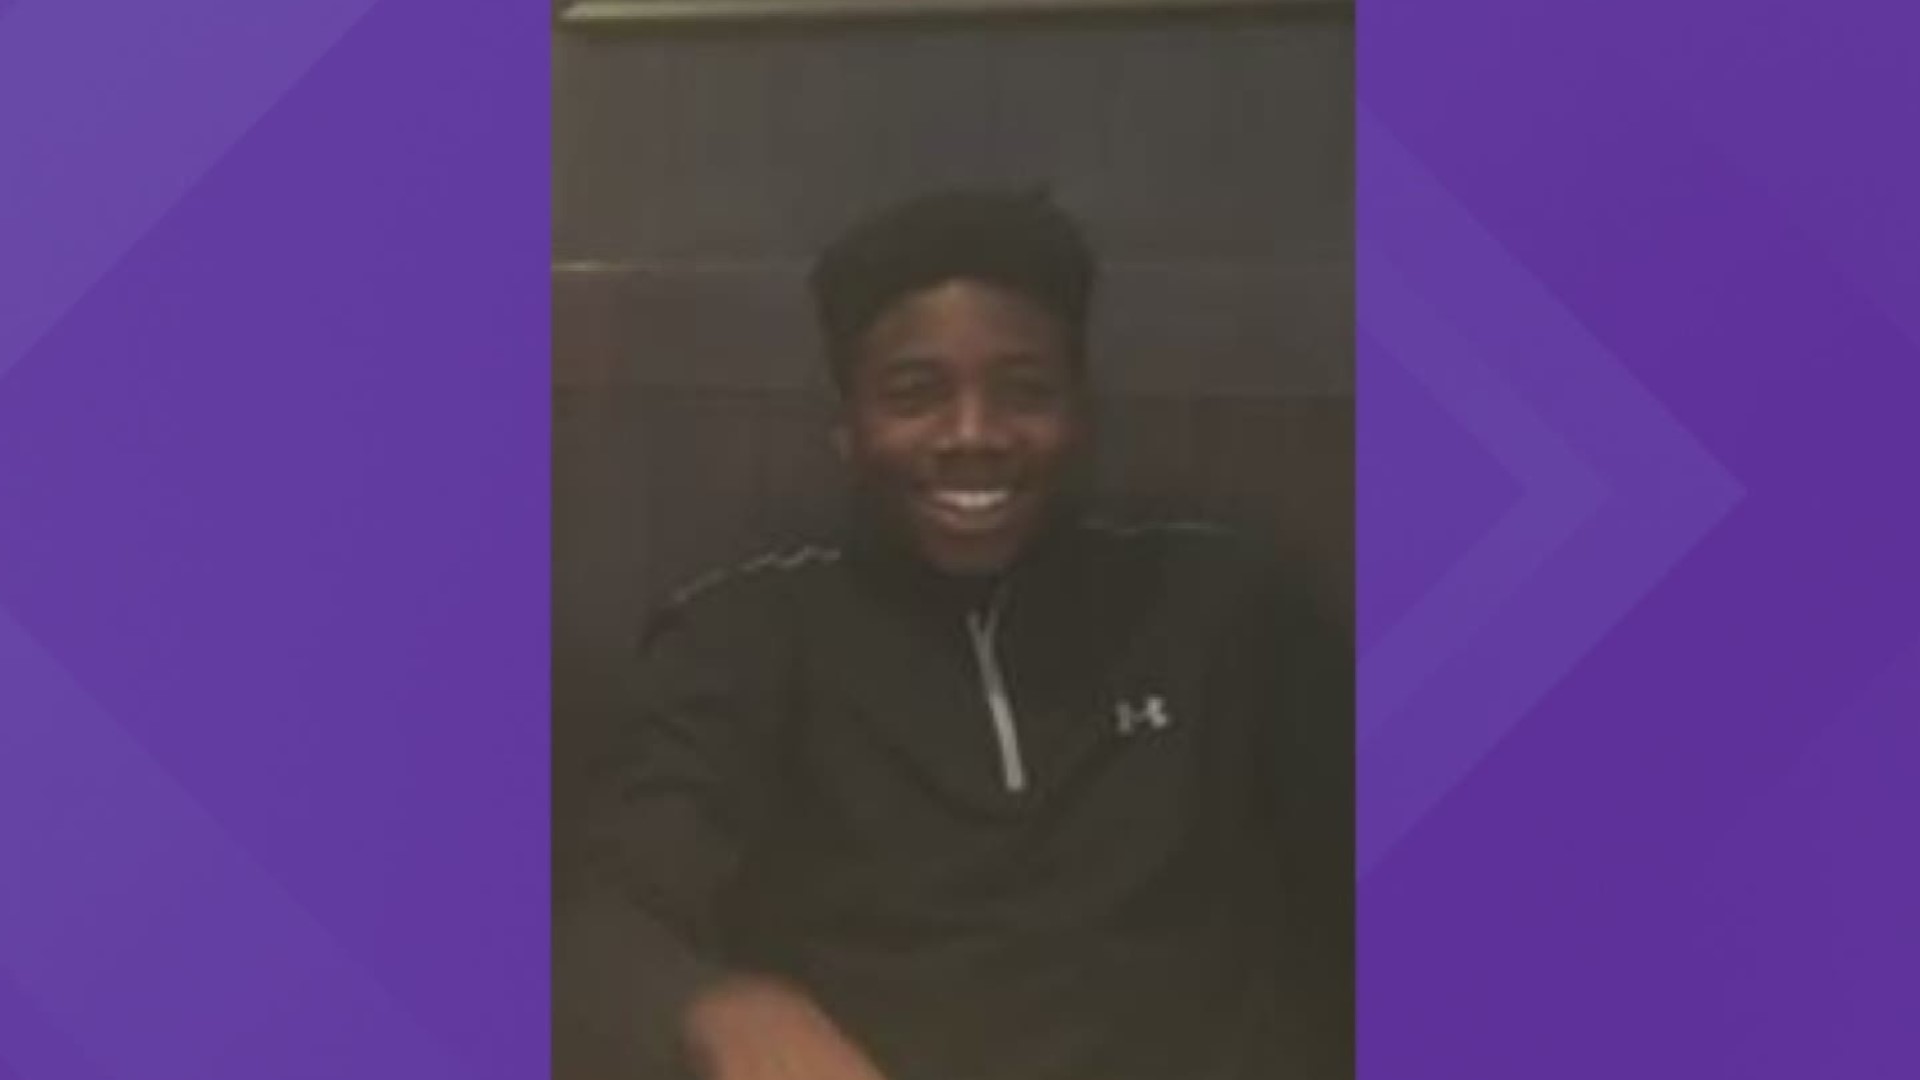 Jabez Spann might be gone, but his friends and family are making sure the teen is never forgotten.

They've created a nonprofit in his memory: The Jabez Spann Foundation. The foundation's first event, called "Peace-ing the Puzzle" is set for next weekend.

The foundation aims to act as a resource for families of missing children.